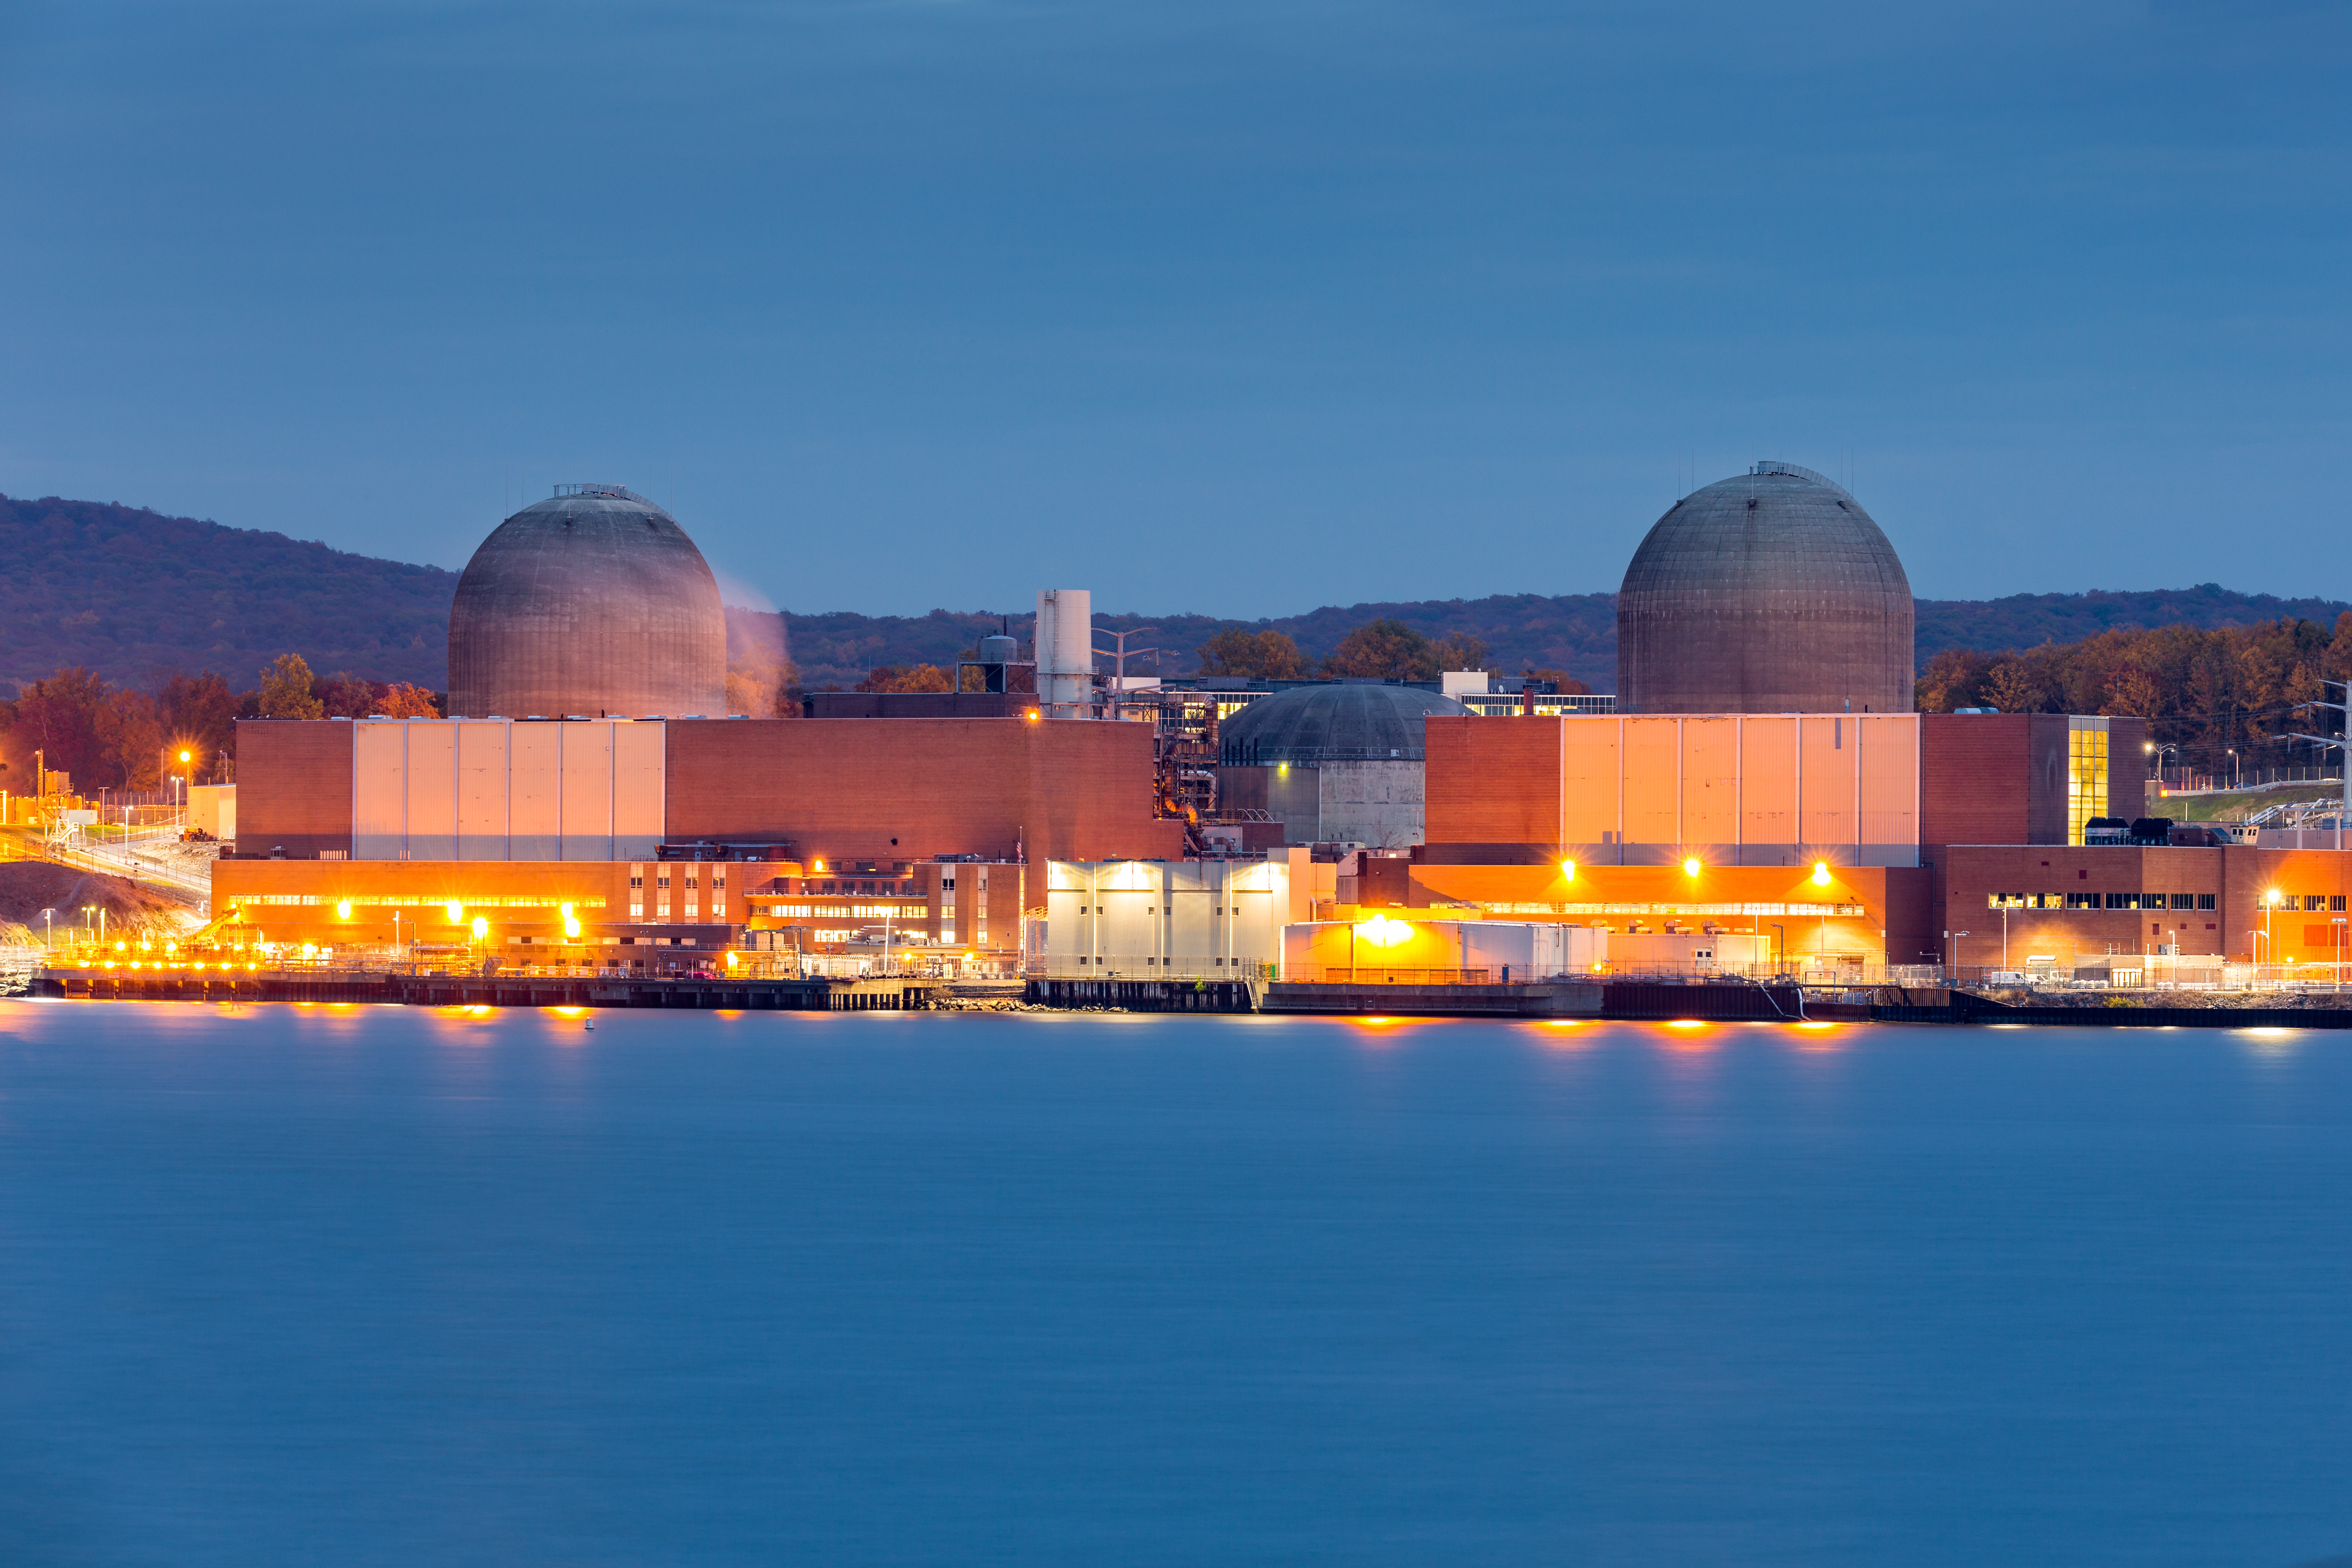 Climate change is an energy problem, so let’s talk honestly about nuclear